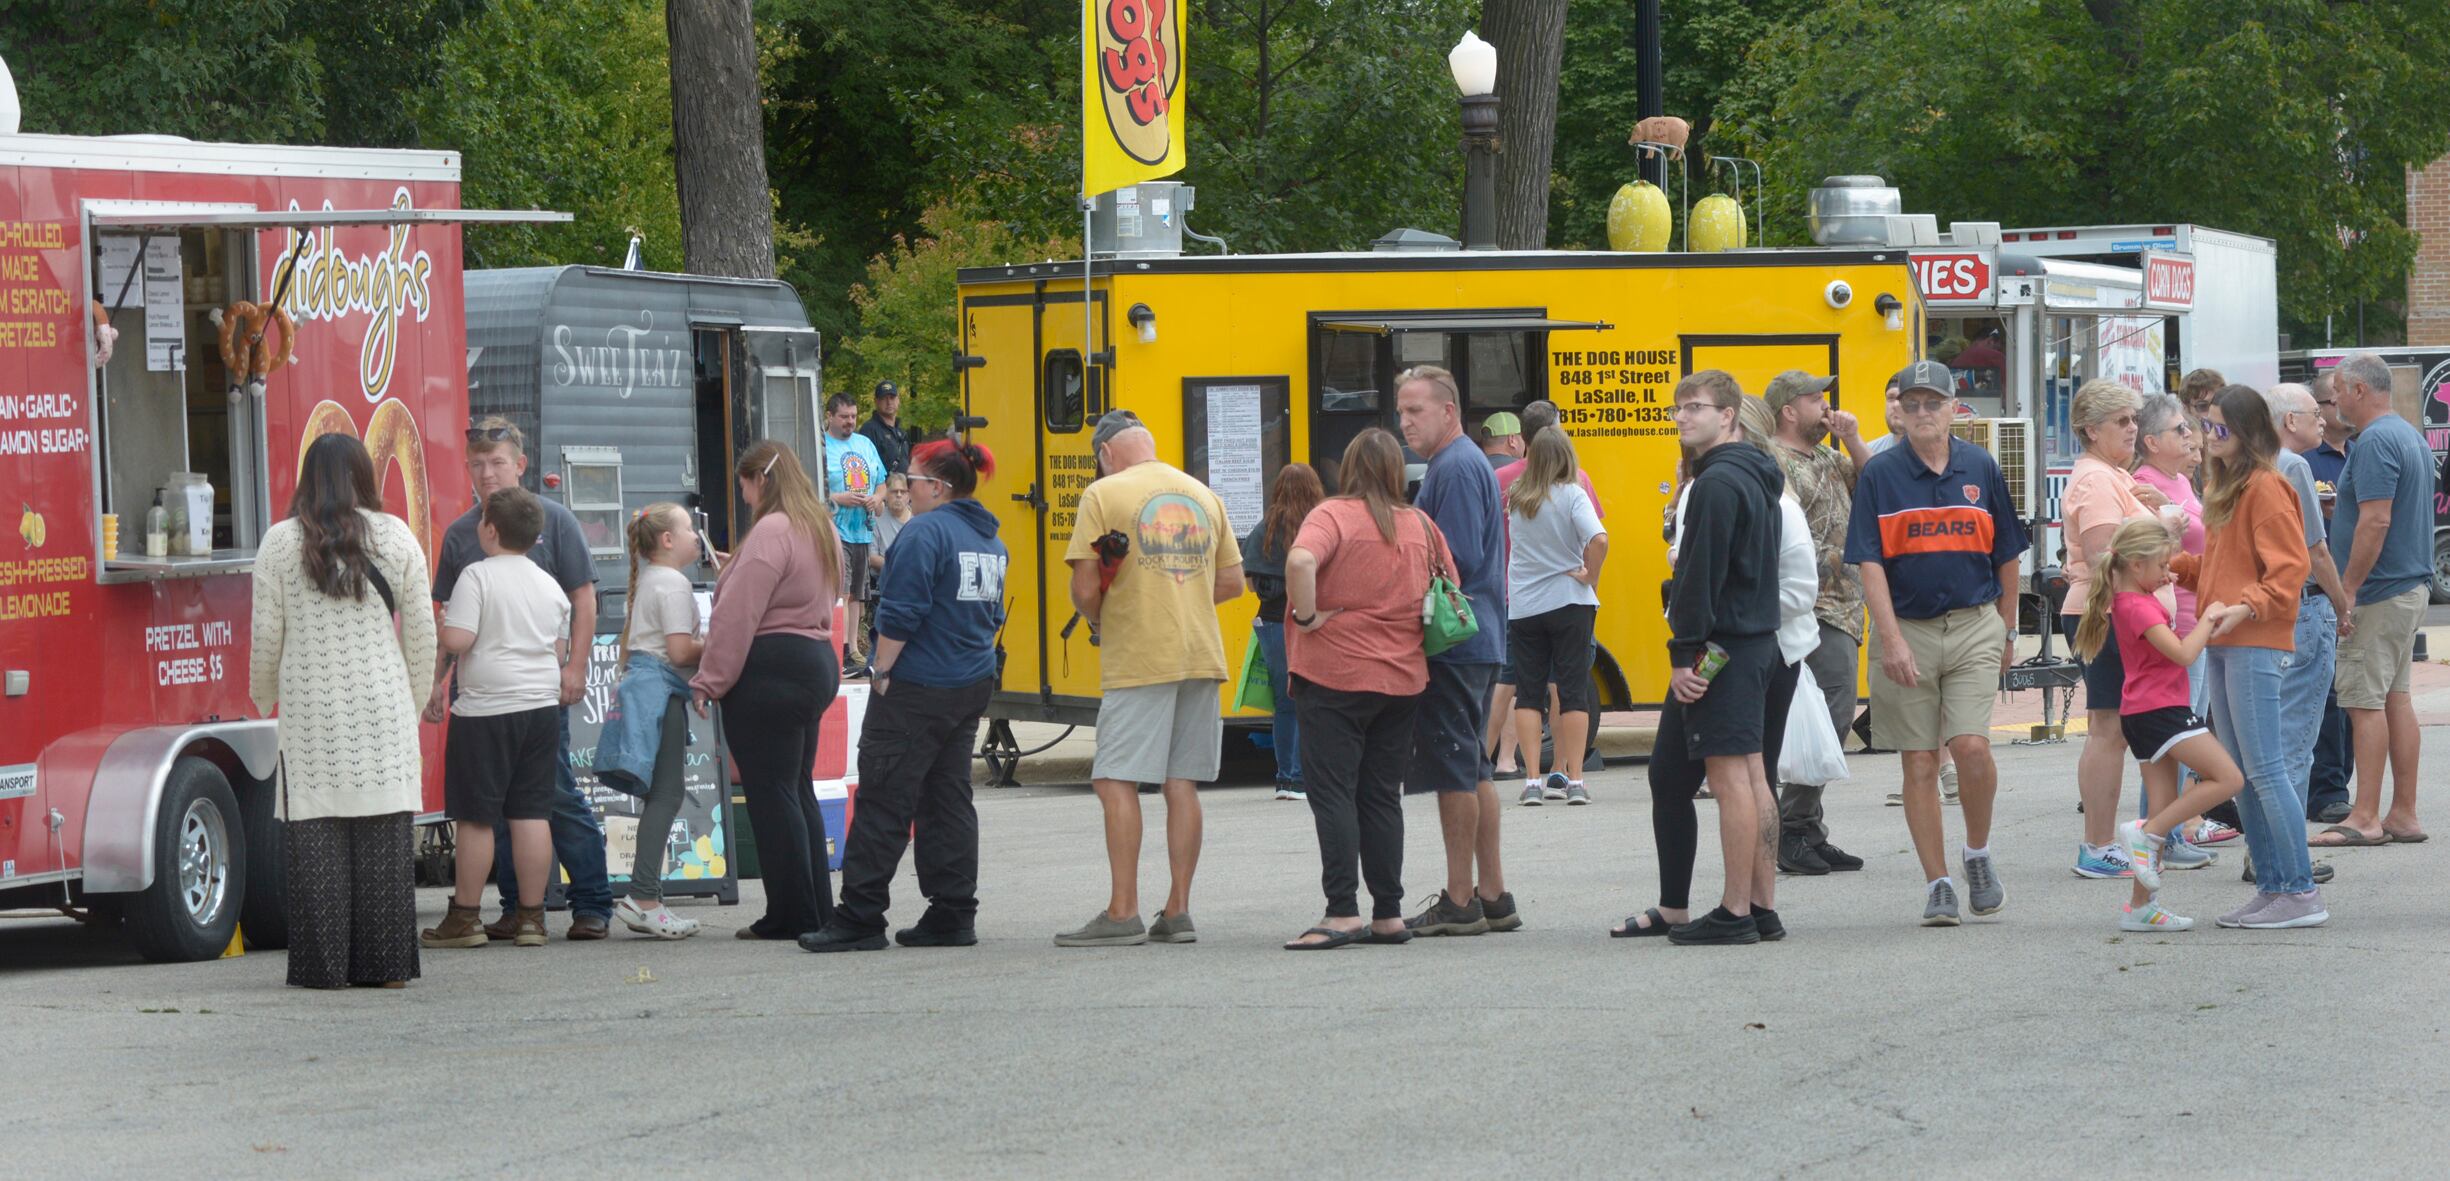 Some lines were long Saturday along City Park in Streator during the Food Truck Festival as those who wished could sample of variety of foods from many vendors.